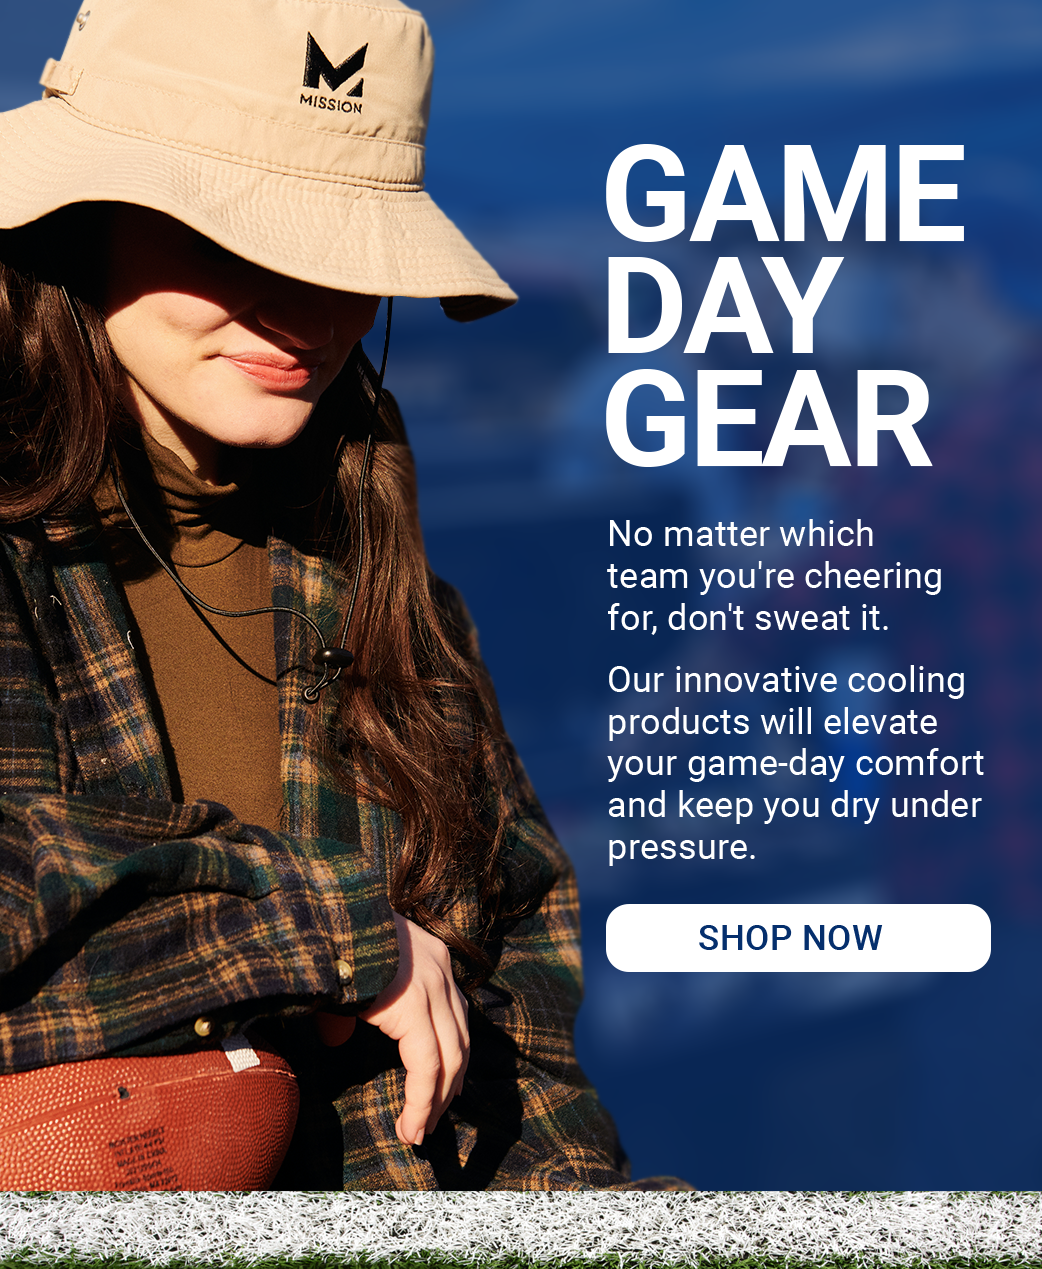 GAME DAY GEAR No matter which team you're cheering for, don't sweat it. Our innovative cooling products will elevate your game-day comfort and keep you dry under pressure. [ SHOP NOW]